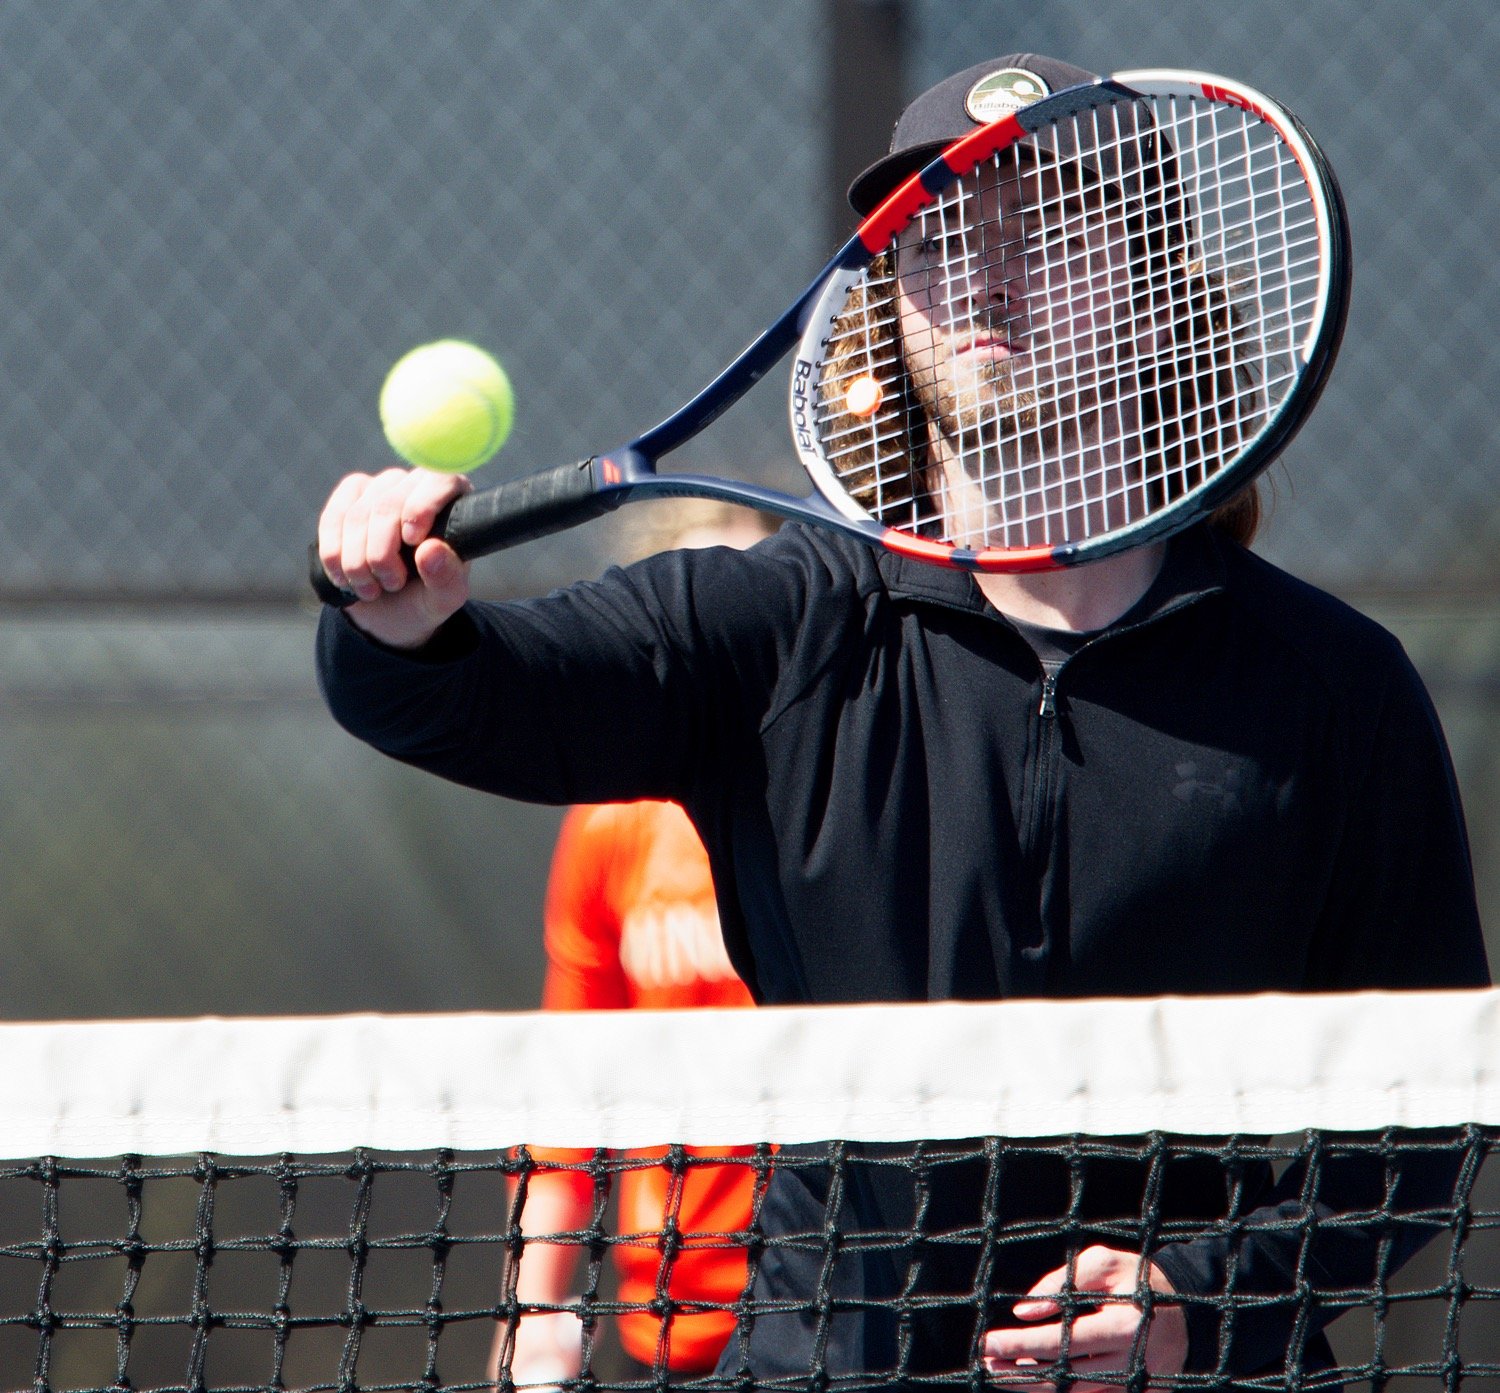 Jack Heard exhibits some solid net play, key to the match win that earned he and doubles parter Sunni Ruffin 2nd place medals and a trip to regionals. [view more volleys]